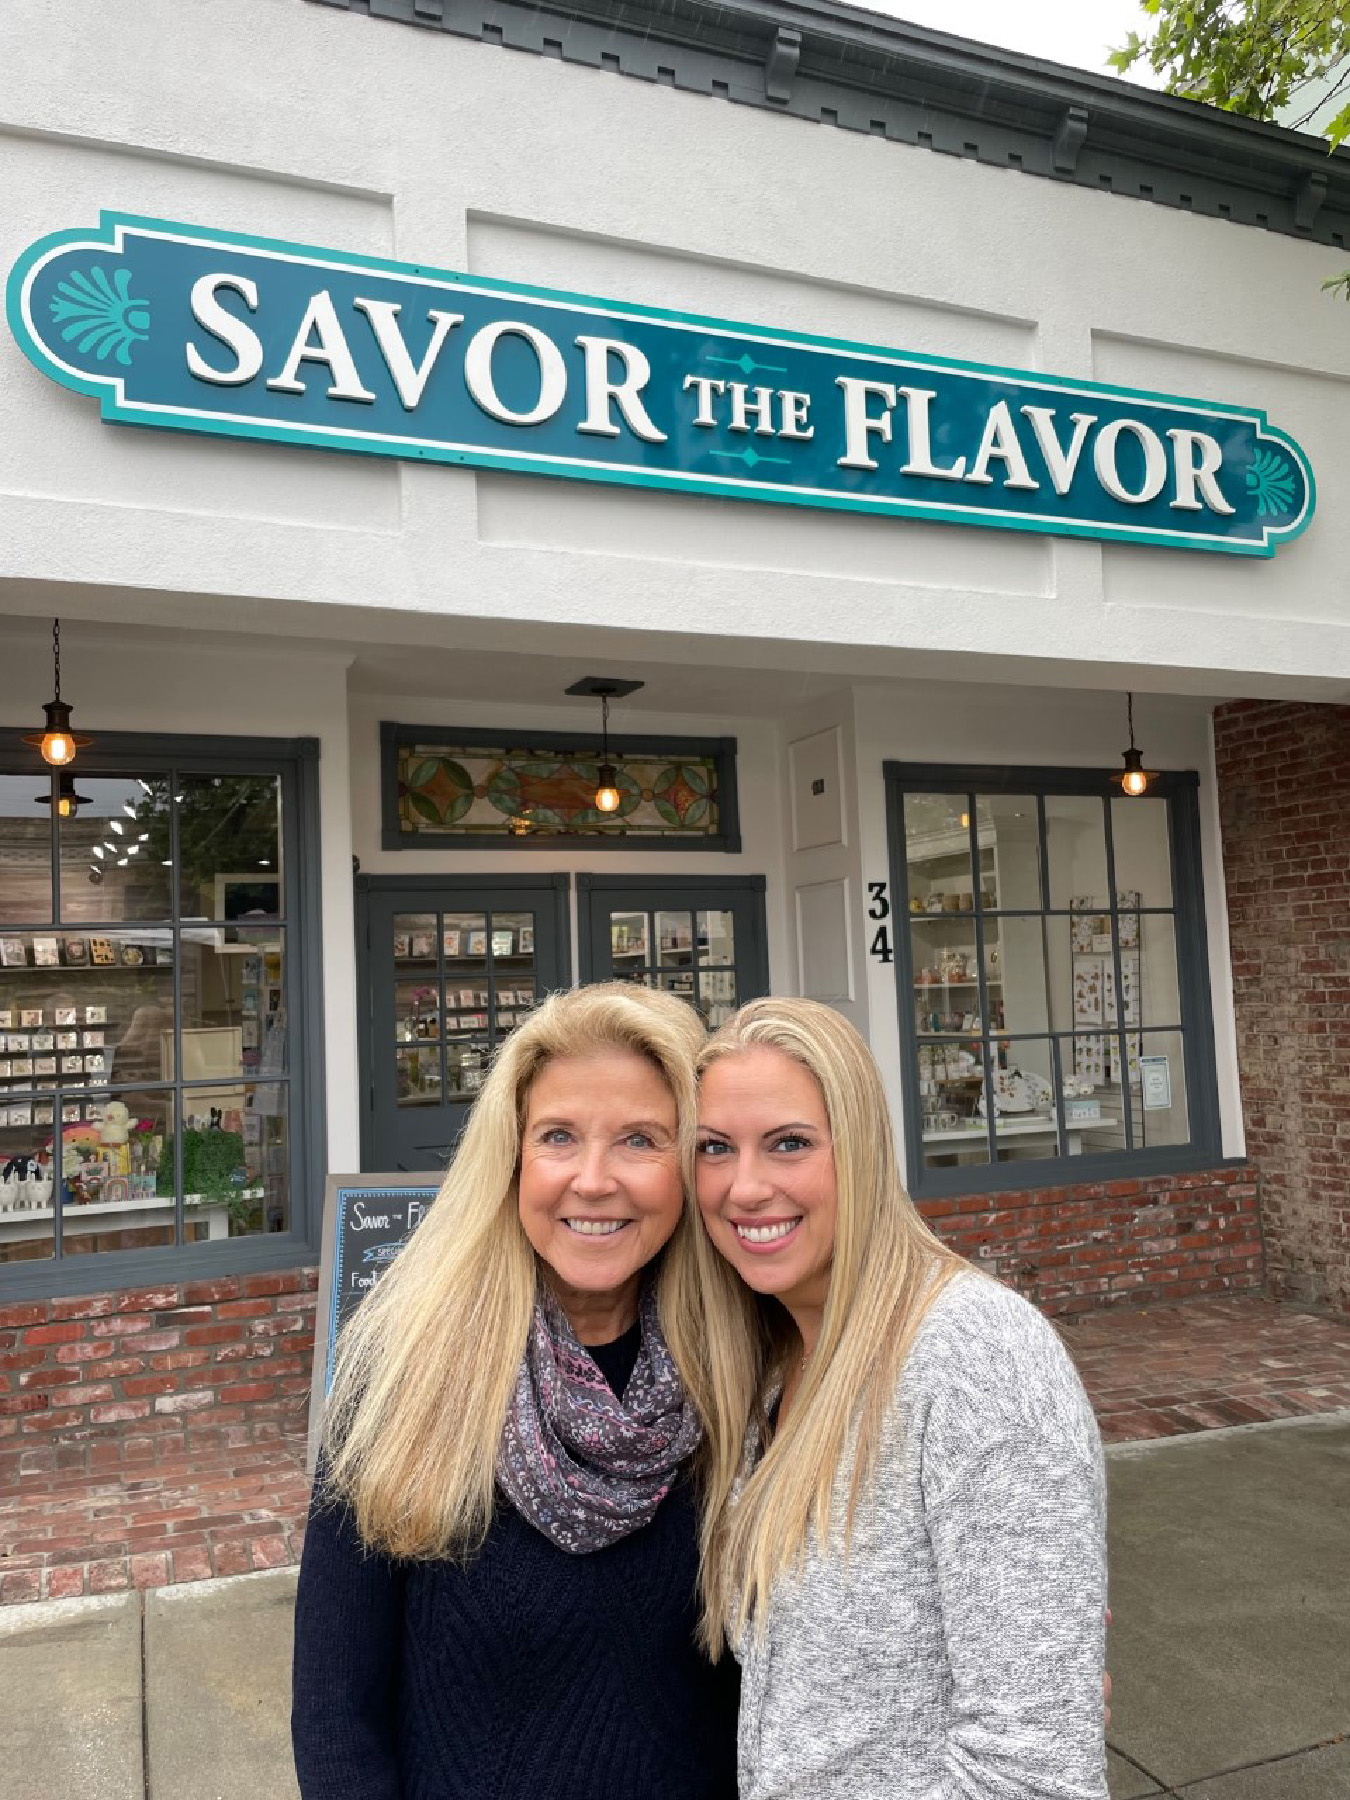 Karen Keegan and daughter Madeline Romo are the founder and current owner, respectively, of specialty food and gourmet gift shop Savor the Flavor